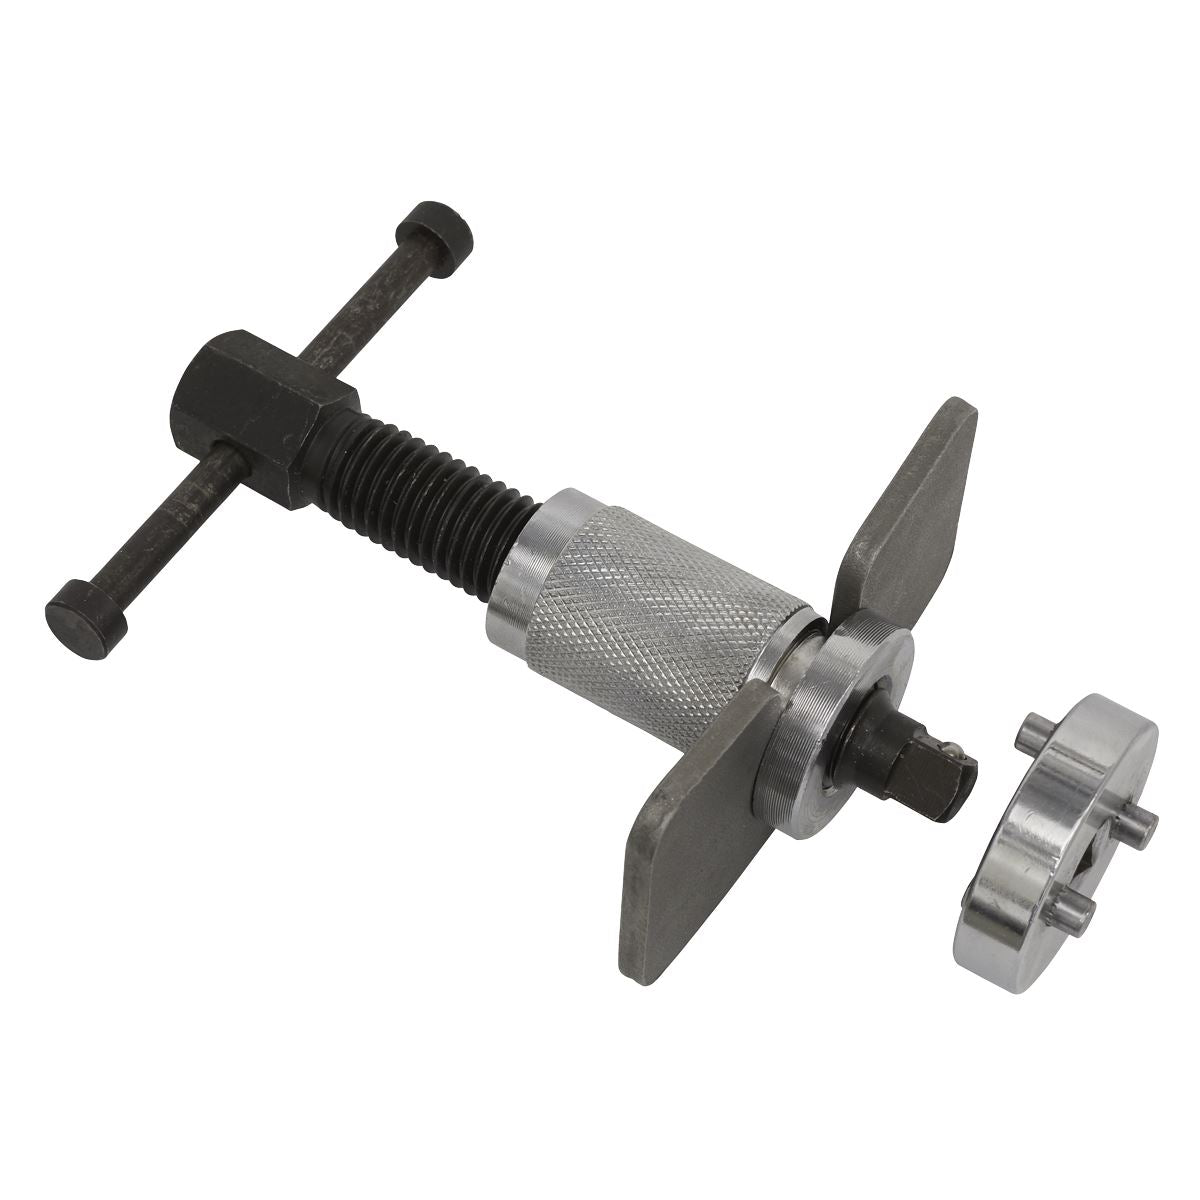 Sealey Brake Piston Wind-Back Tool with Double Adaptor Left-Handed